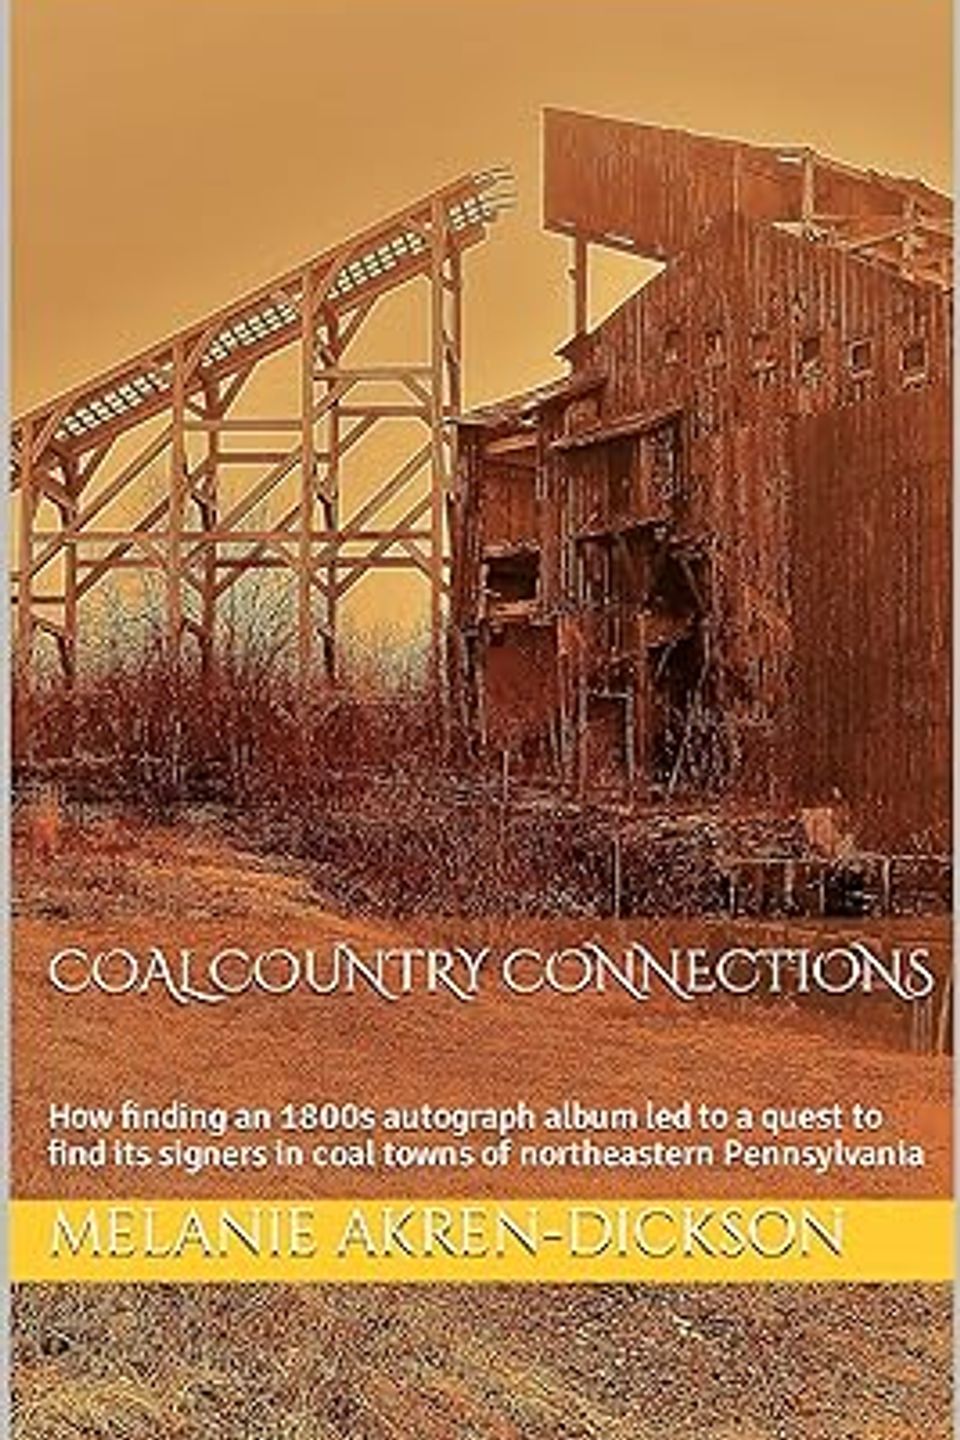 Coal country